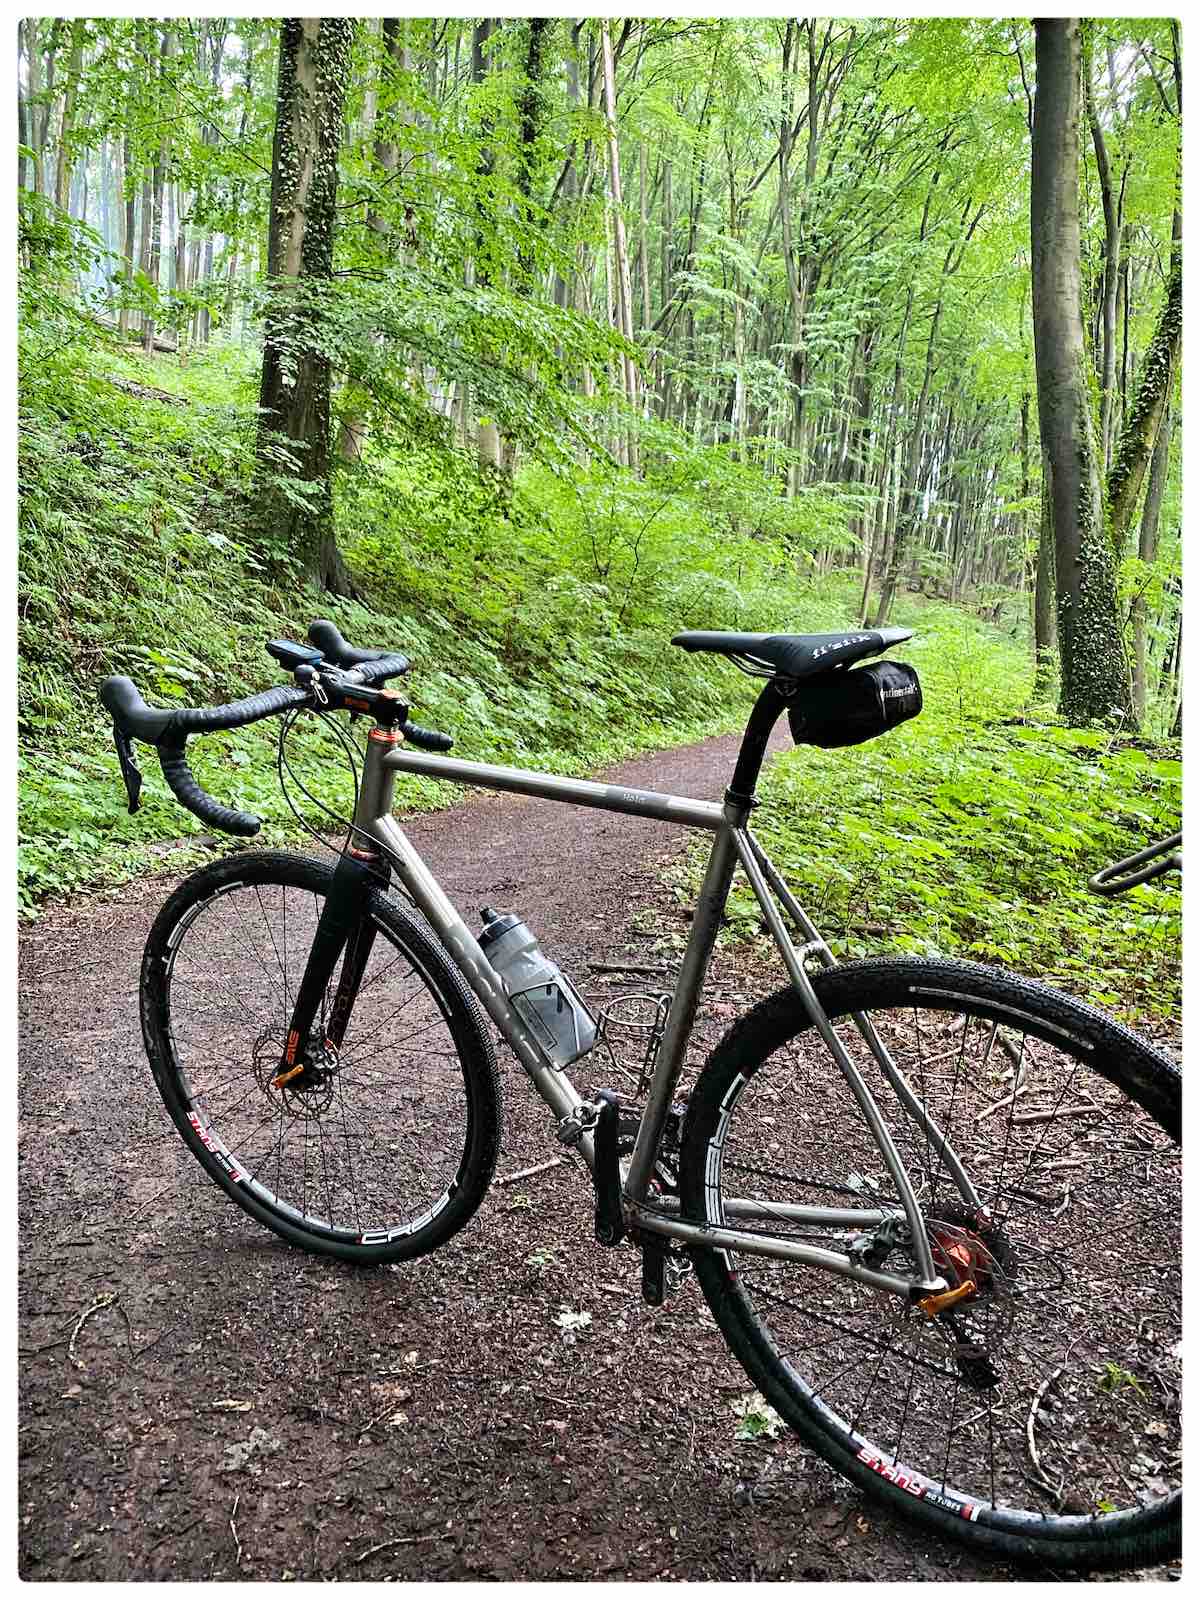 bikerumor pic of the day a titanium gravel bike is on a packed earth trail amid a bright green forest in Saarland Germany.